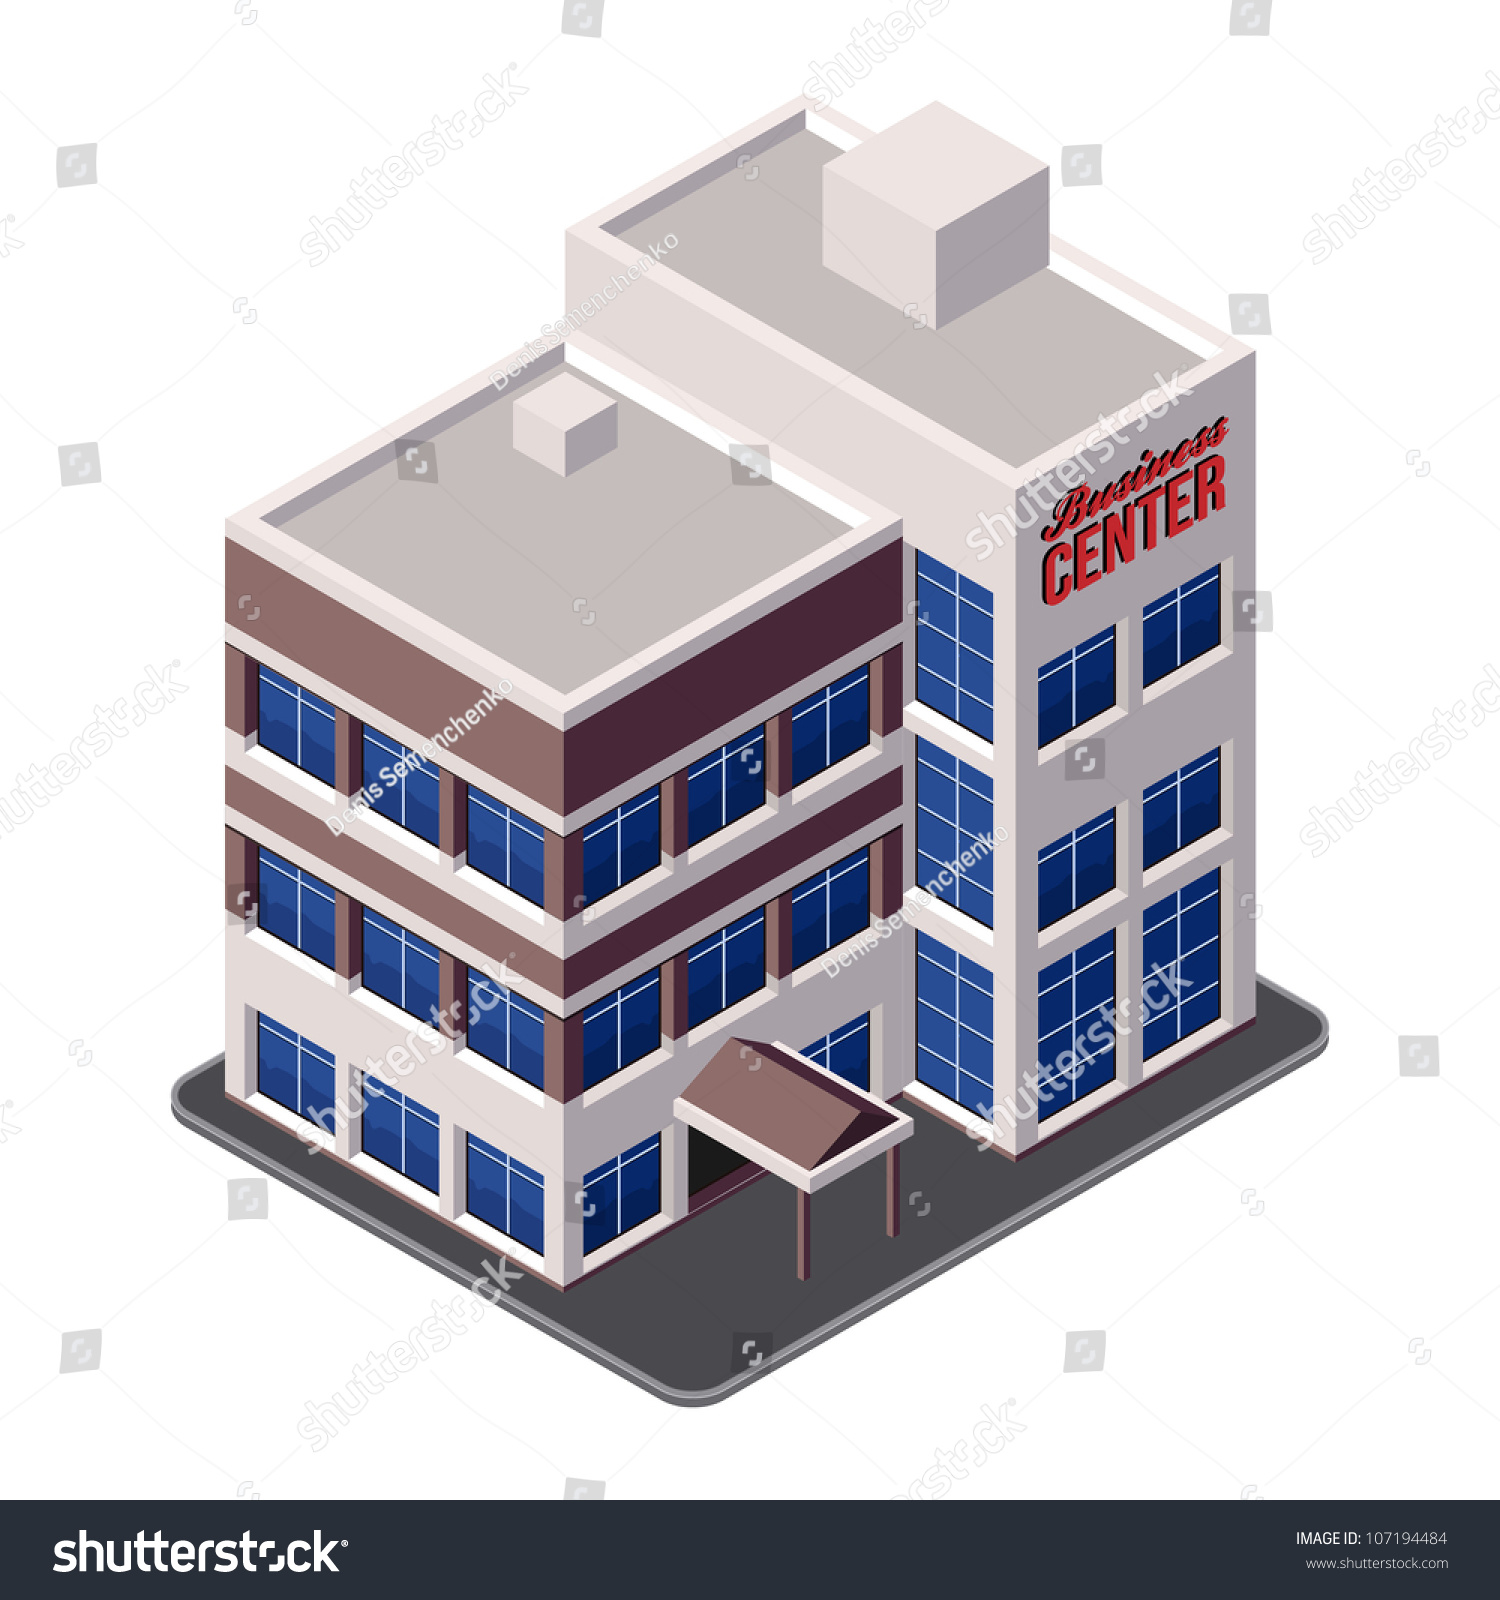 office builder clipart - photo #38